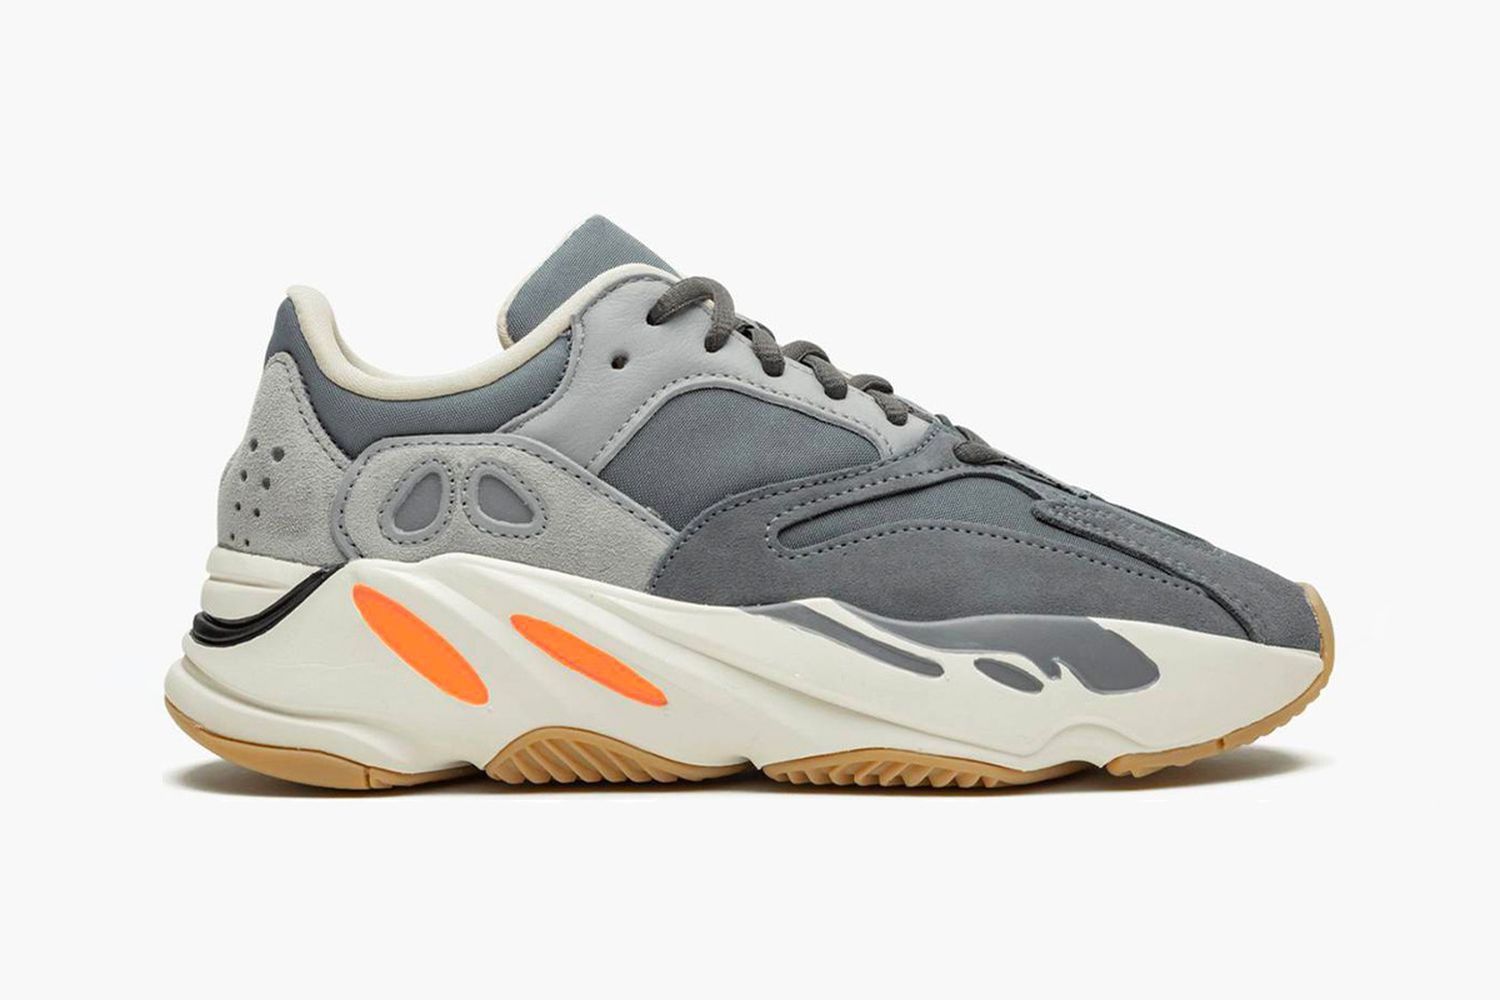 10 of the Best YEEZY Boost 700 to Buy in 2022